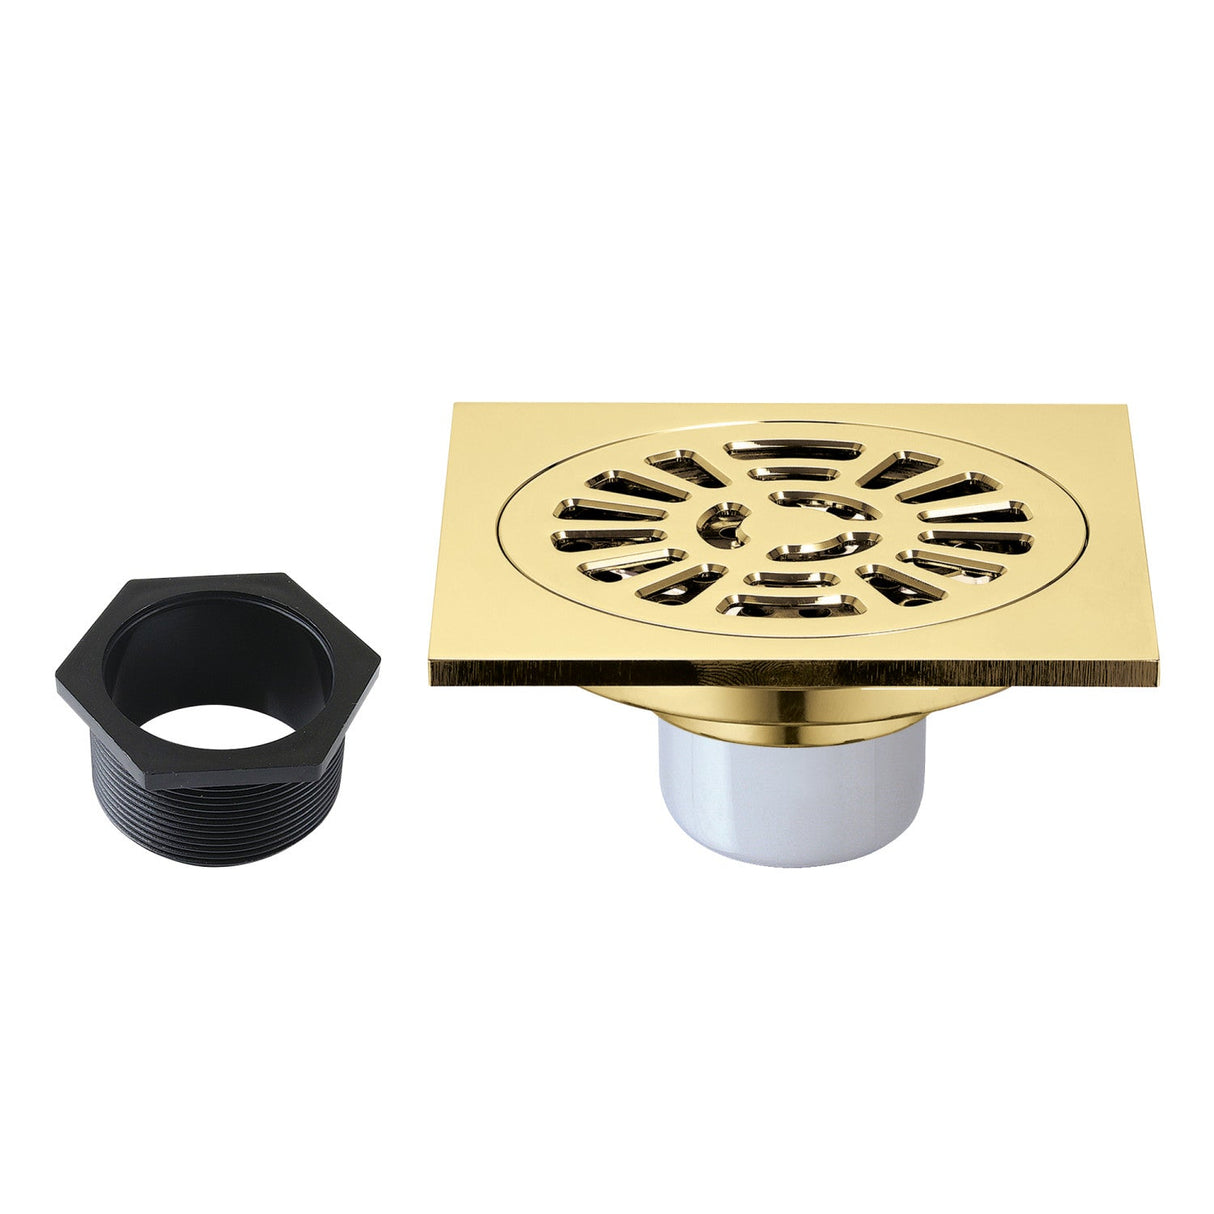 Watercourse BSF4267PB 4-Inch Square Brass Shower Drain, Polished Brass